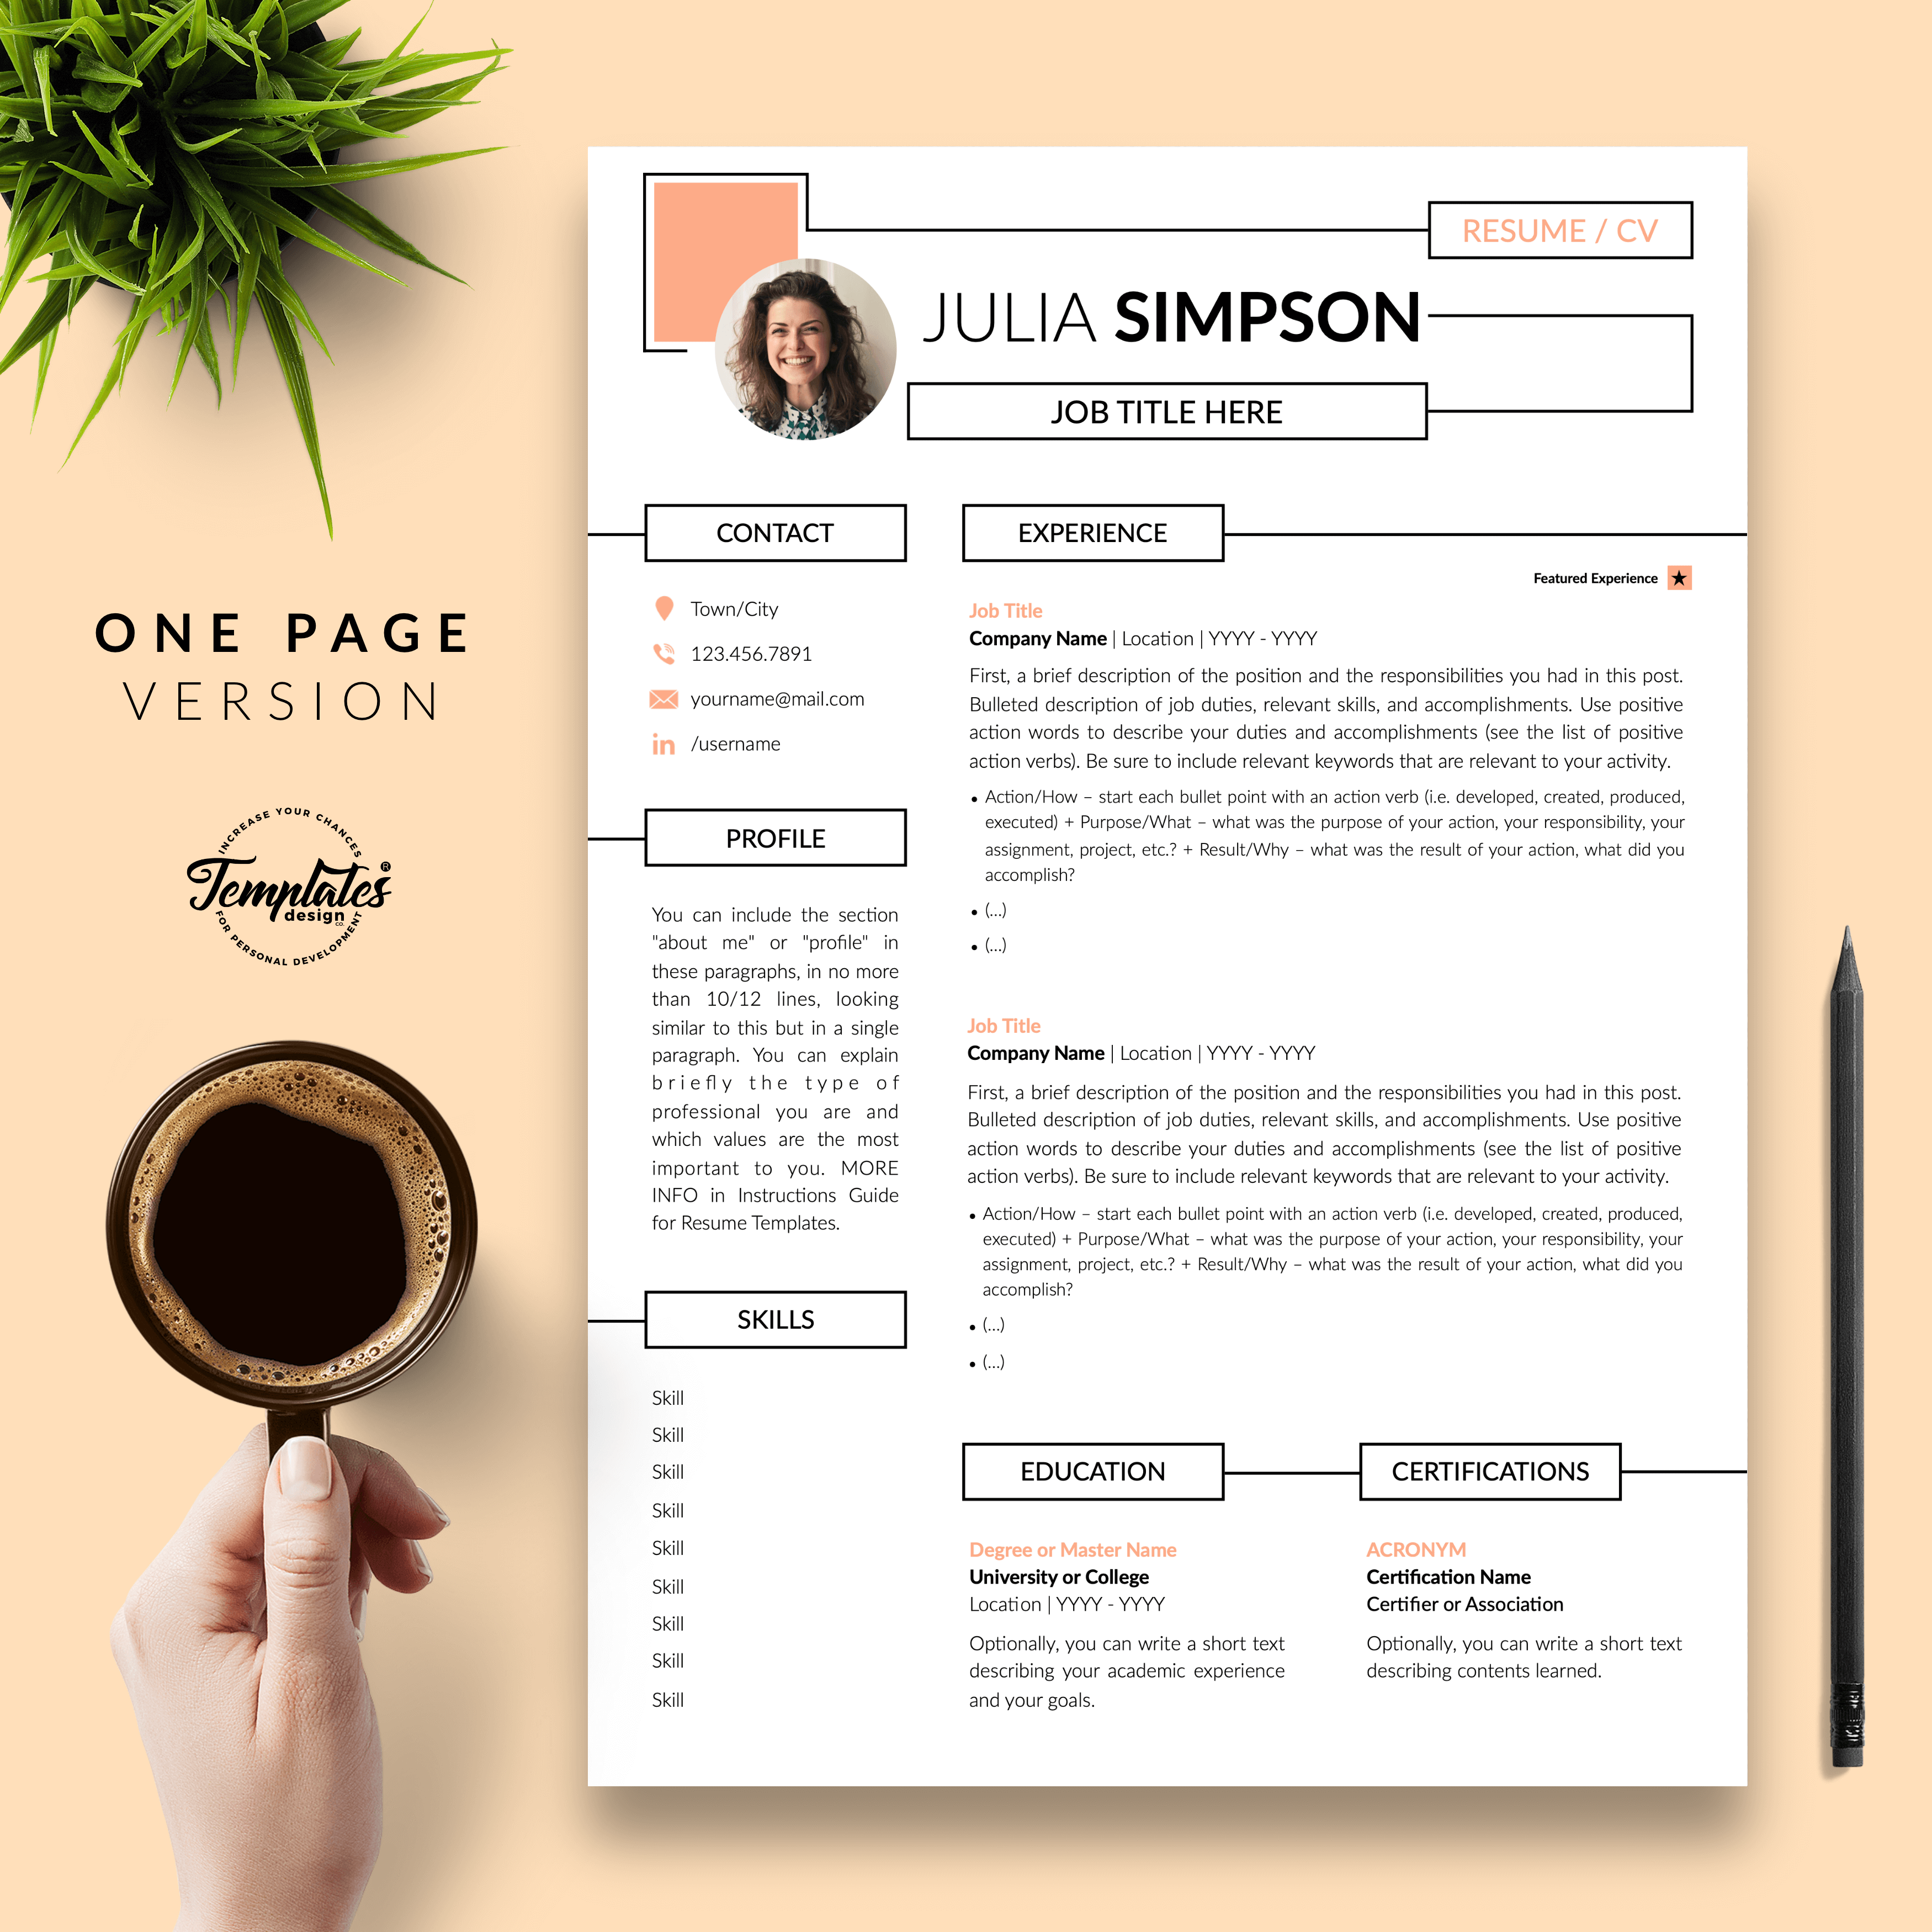 Creative Resume for Engineers - Julia Simpson 02 - One Page Version